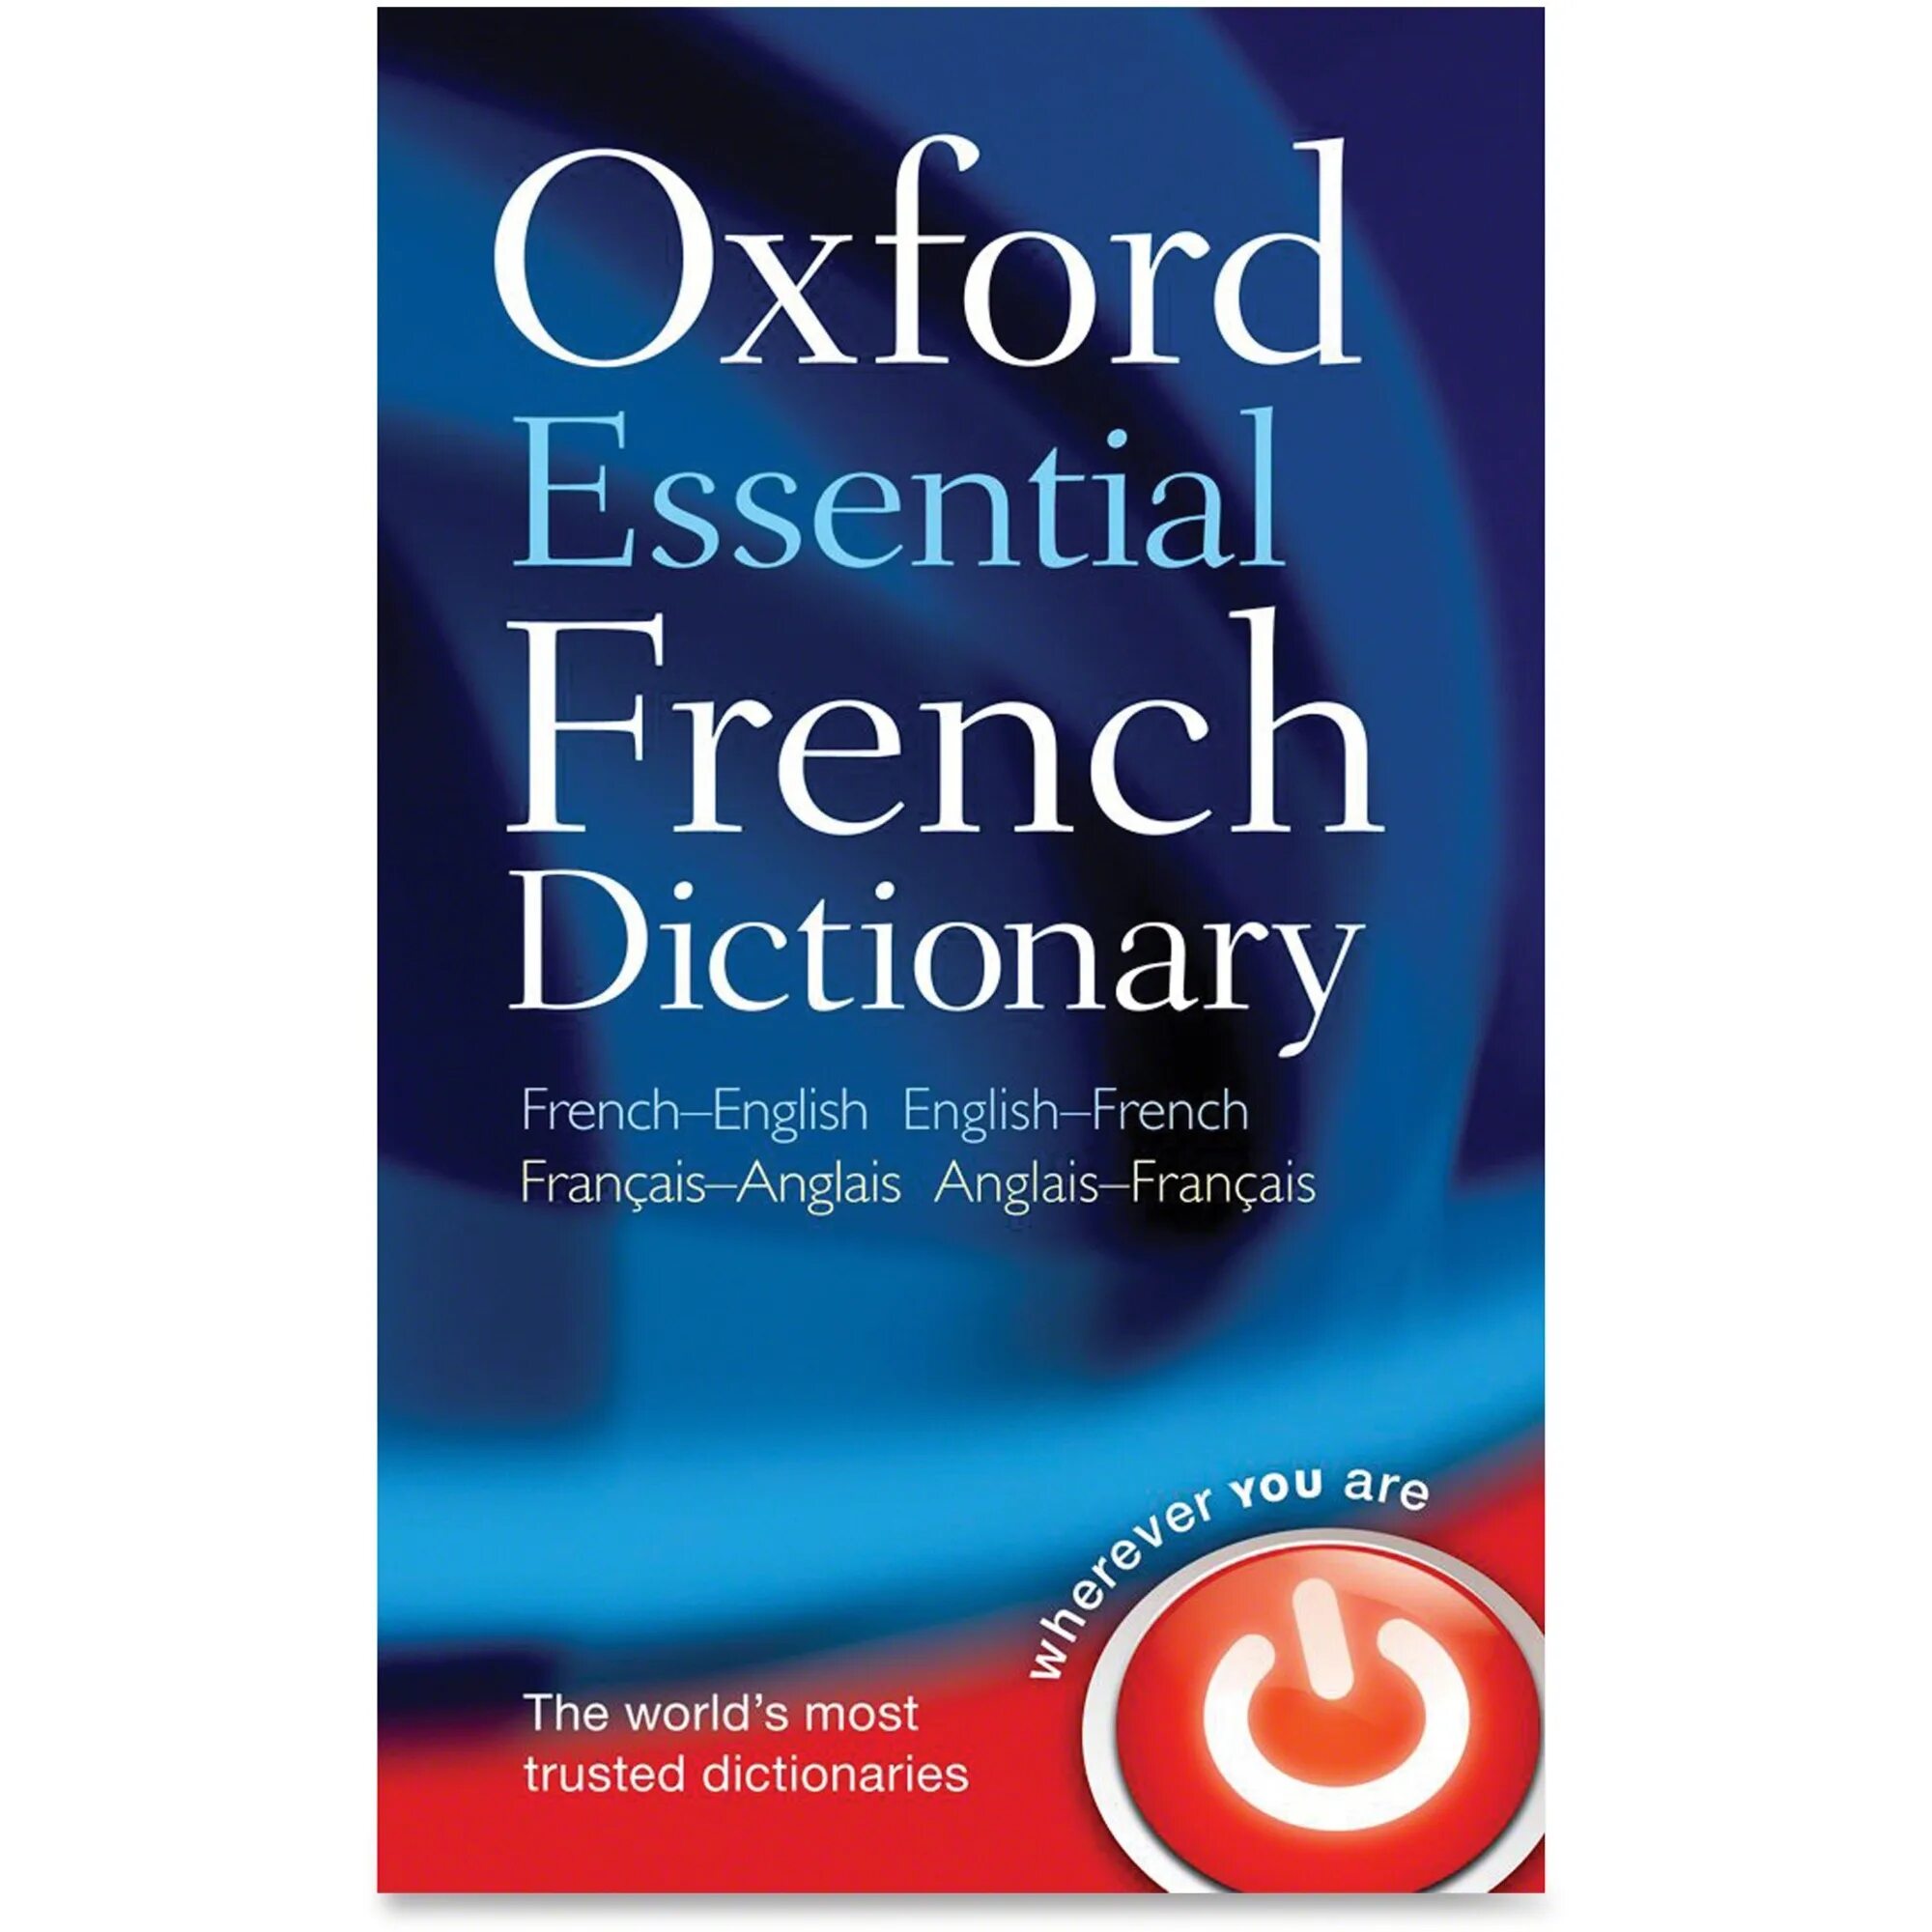 French dictionary. Oxford Essential Dictionary. English French Dictionary. Oxford French Mini Dictionary. Oxford Dictionary of English книга.